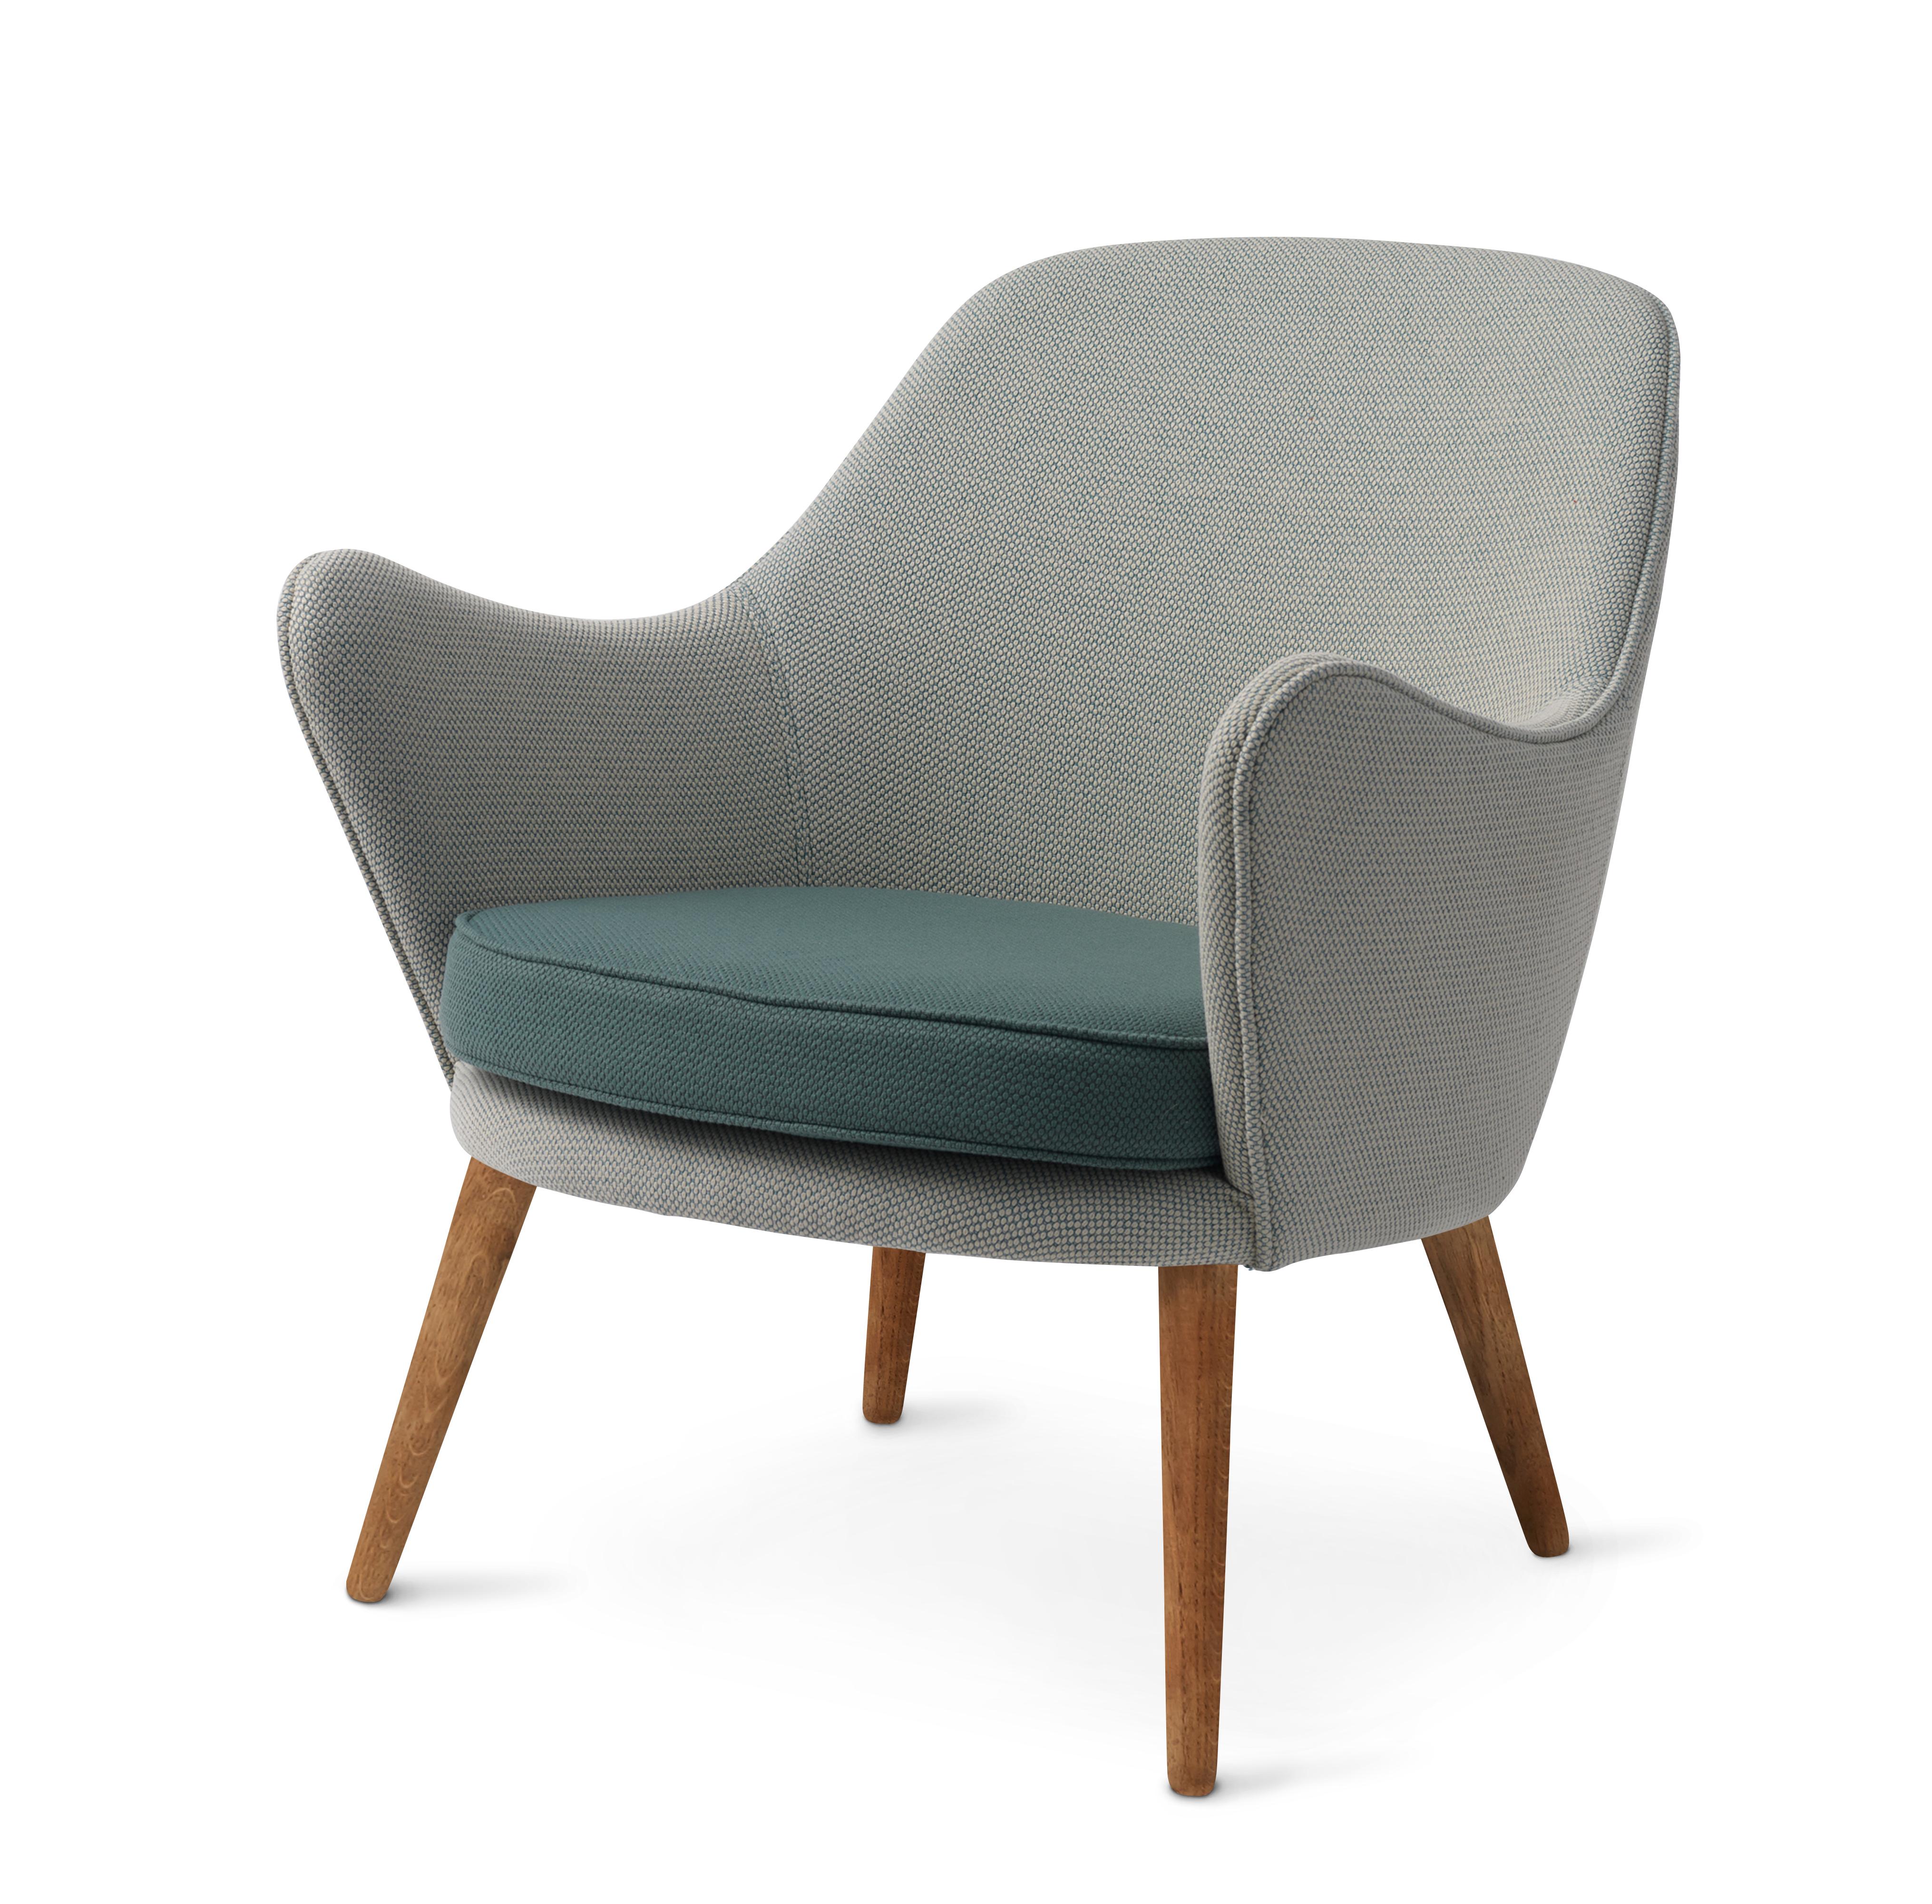 For Sale: Gray (Merit021/Merit017) Dwell Lounge Chair, by Hans Olsen from Warm Nordic 2